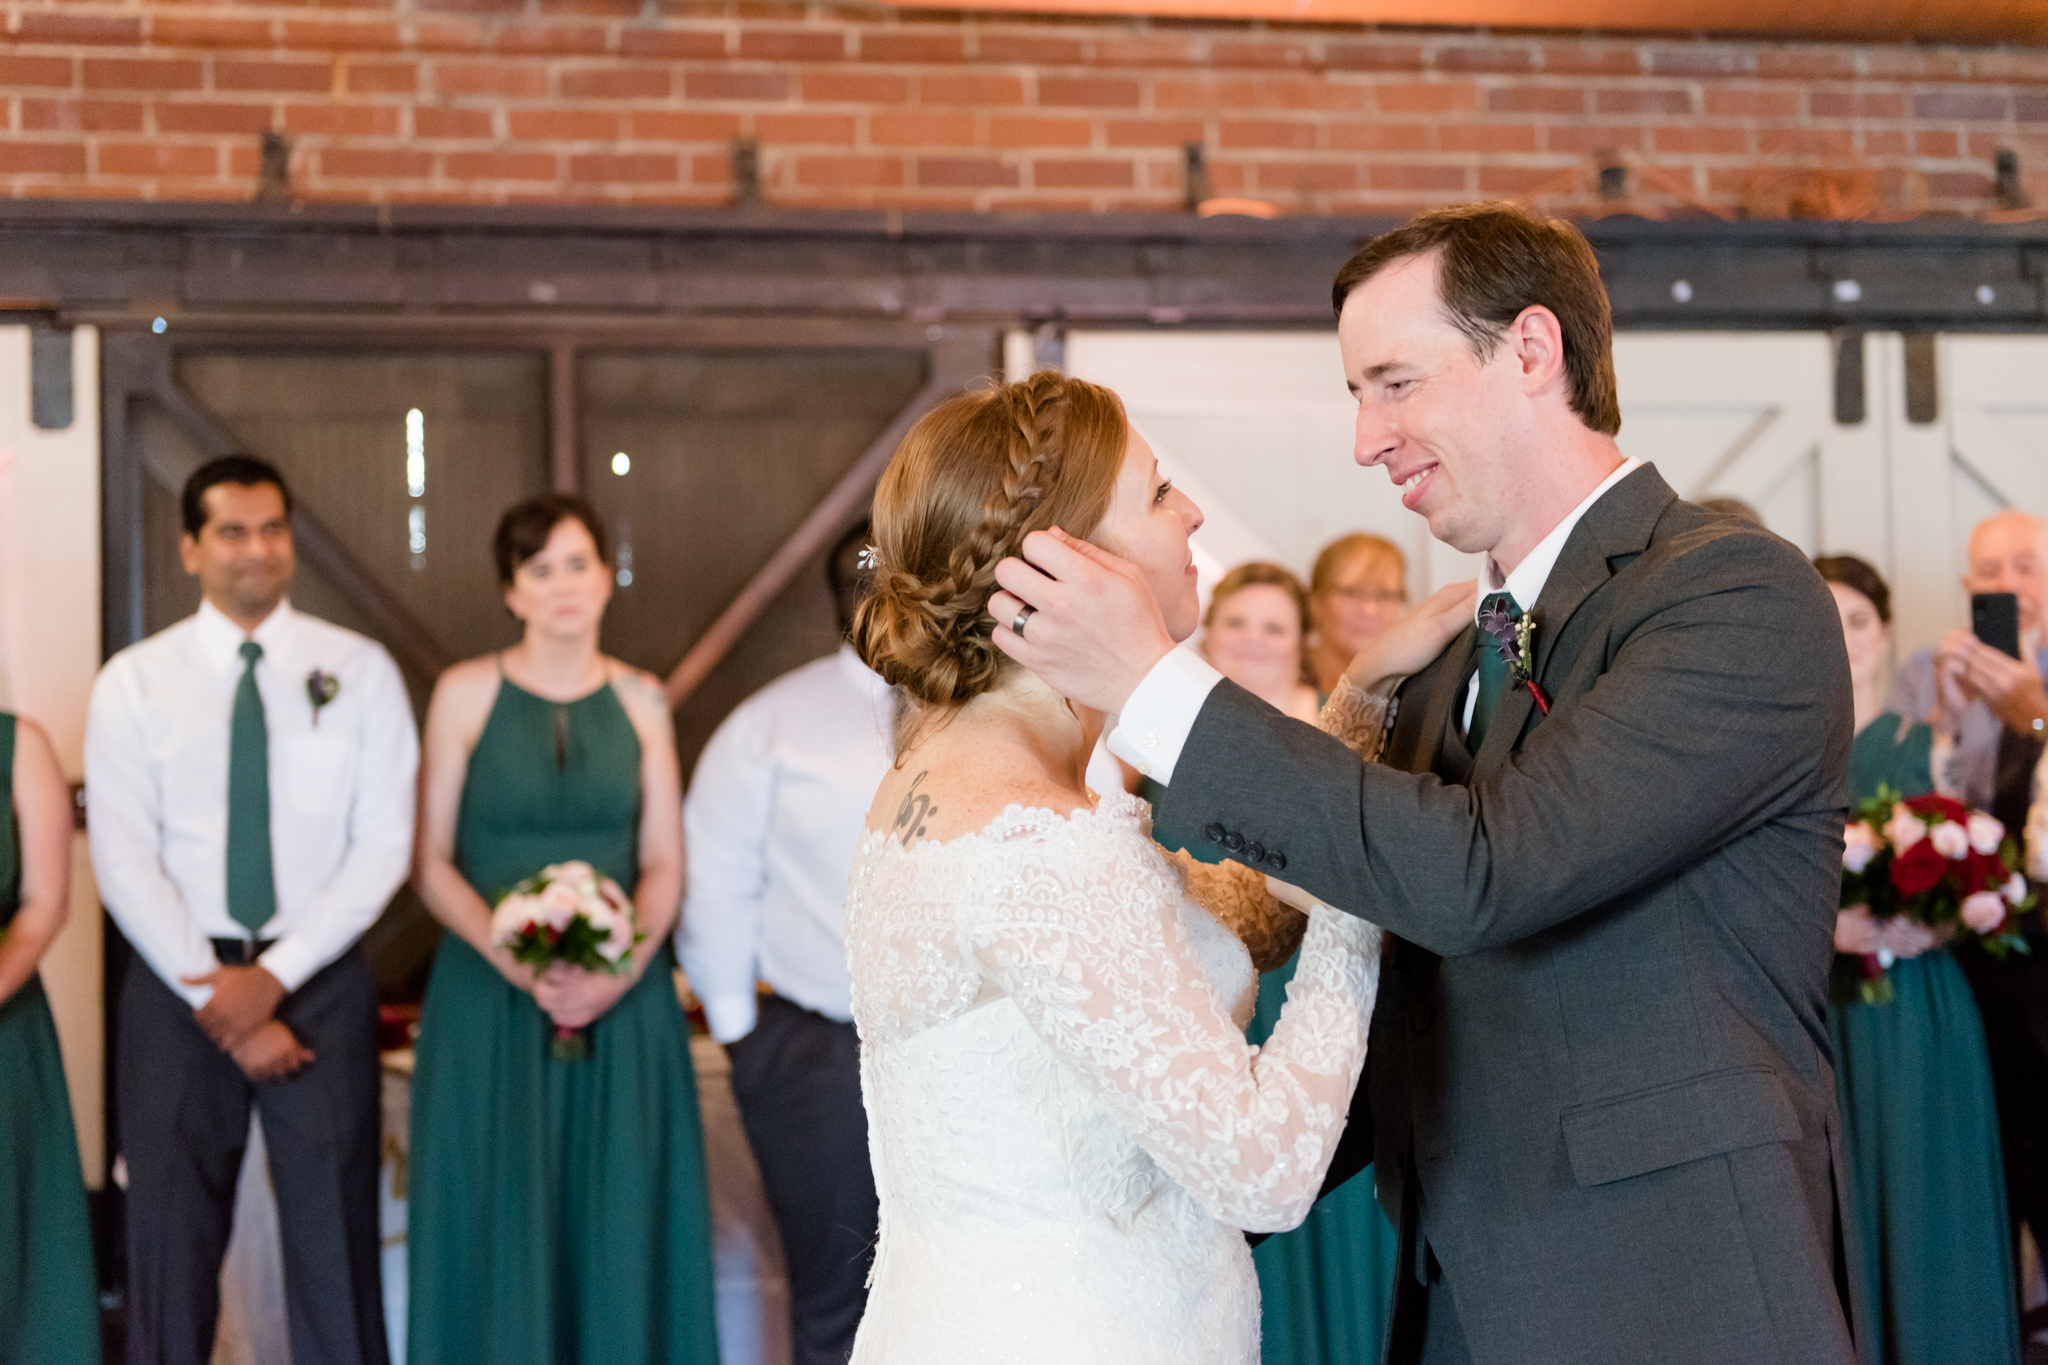 Groom looks lovingly at bride during dance.